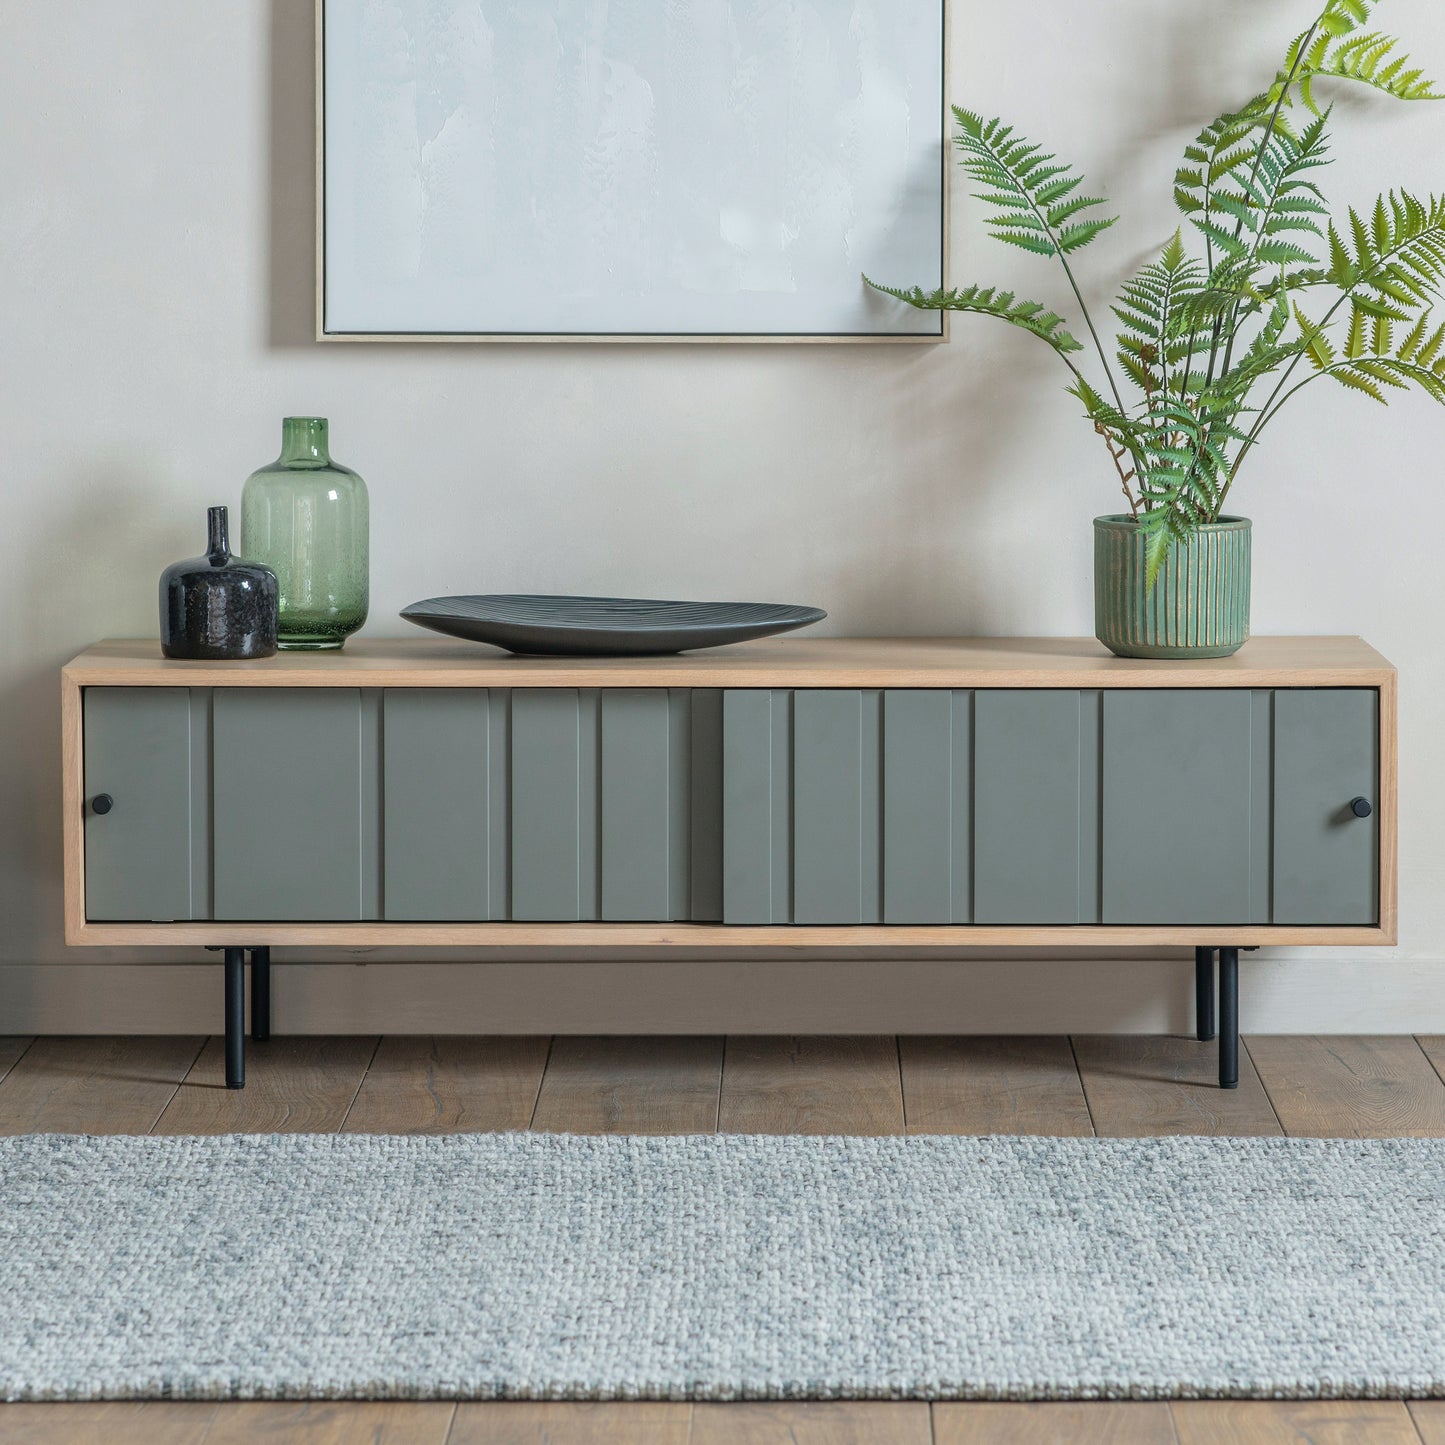 A grey and wood sideboard with a plant on it.